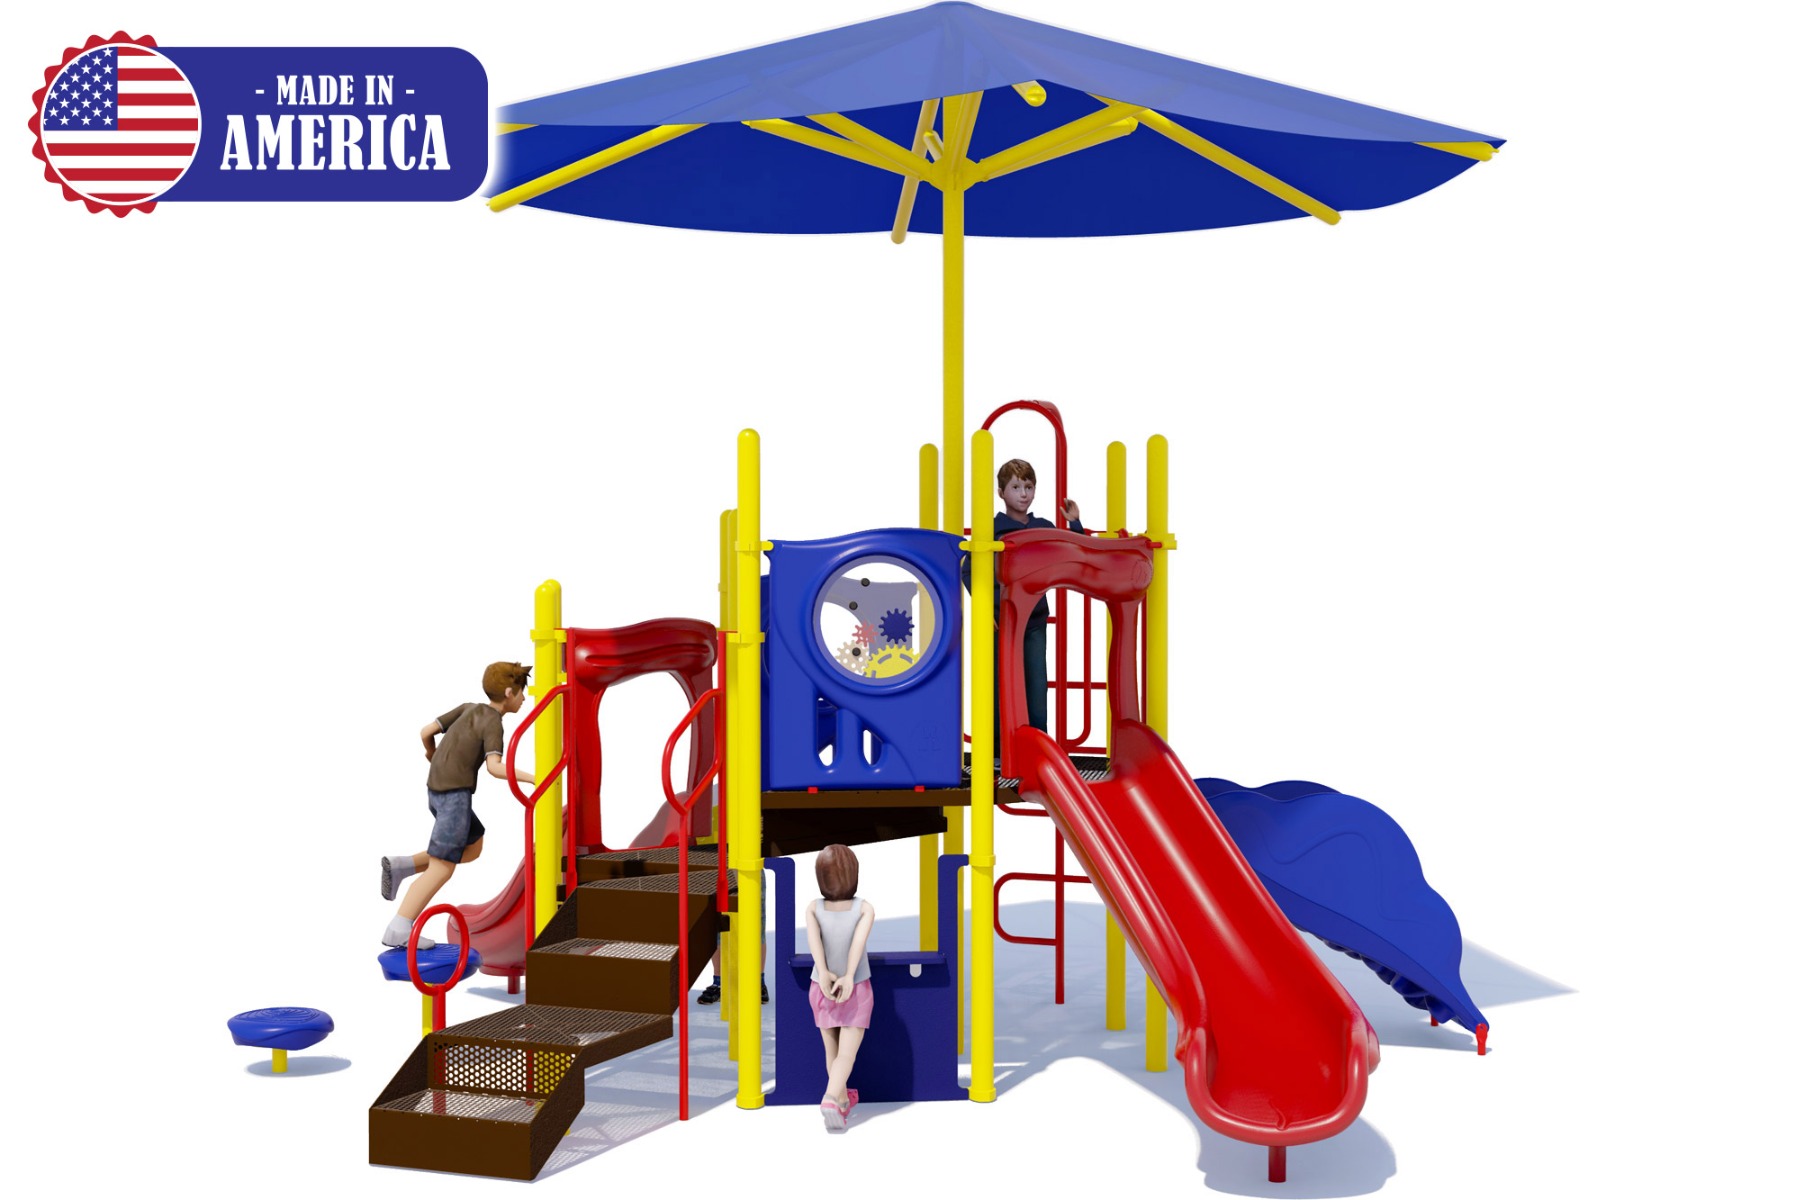 Play in the Shade - Value Boss - Made in USA Playground - Front View